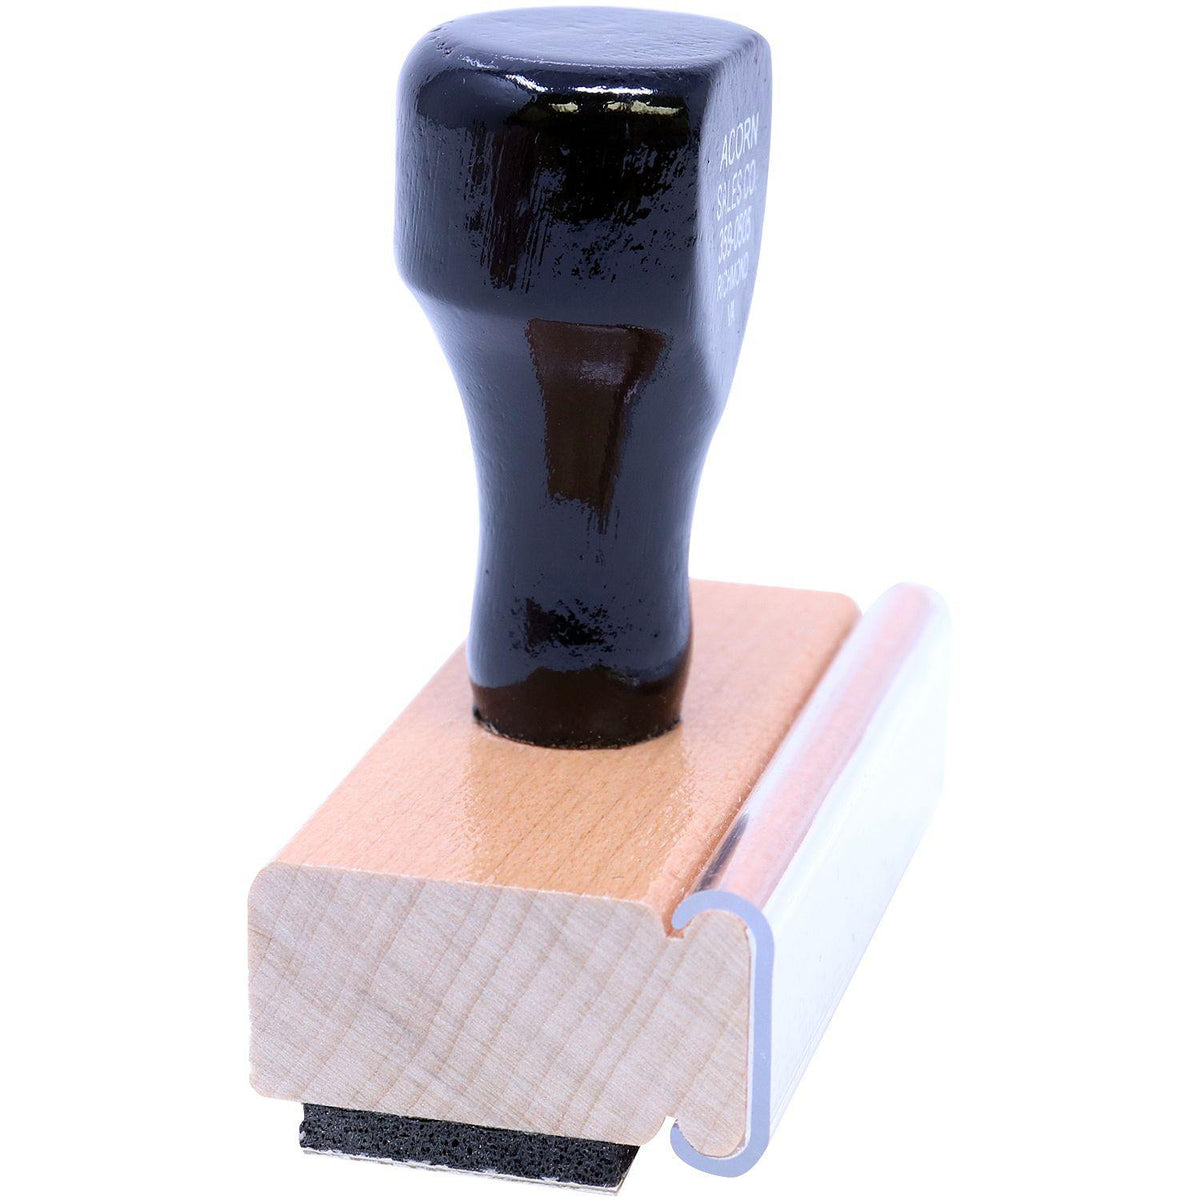 Quarantine Rubber Stamp - Engineer Seal Stamps - Brand_Acorn, Impression Size_Small, Stamp Type_Regular Stamp, Type of Use_Medical Office